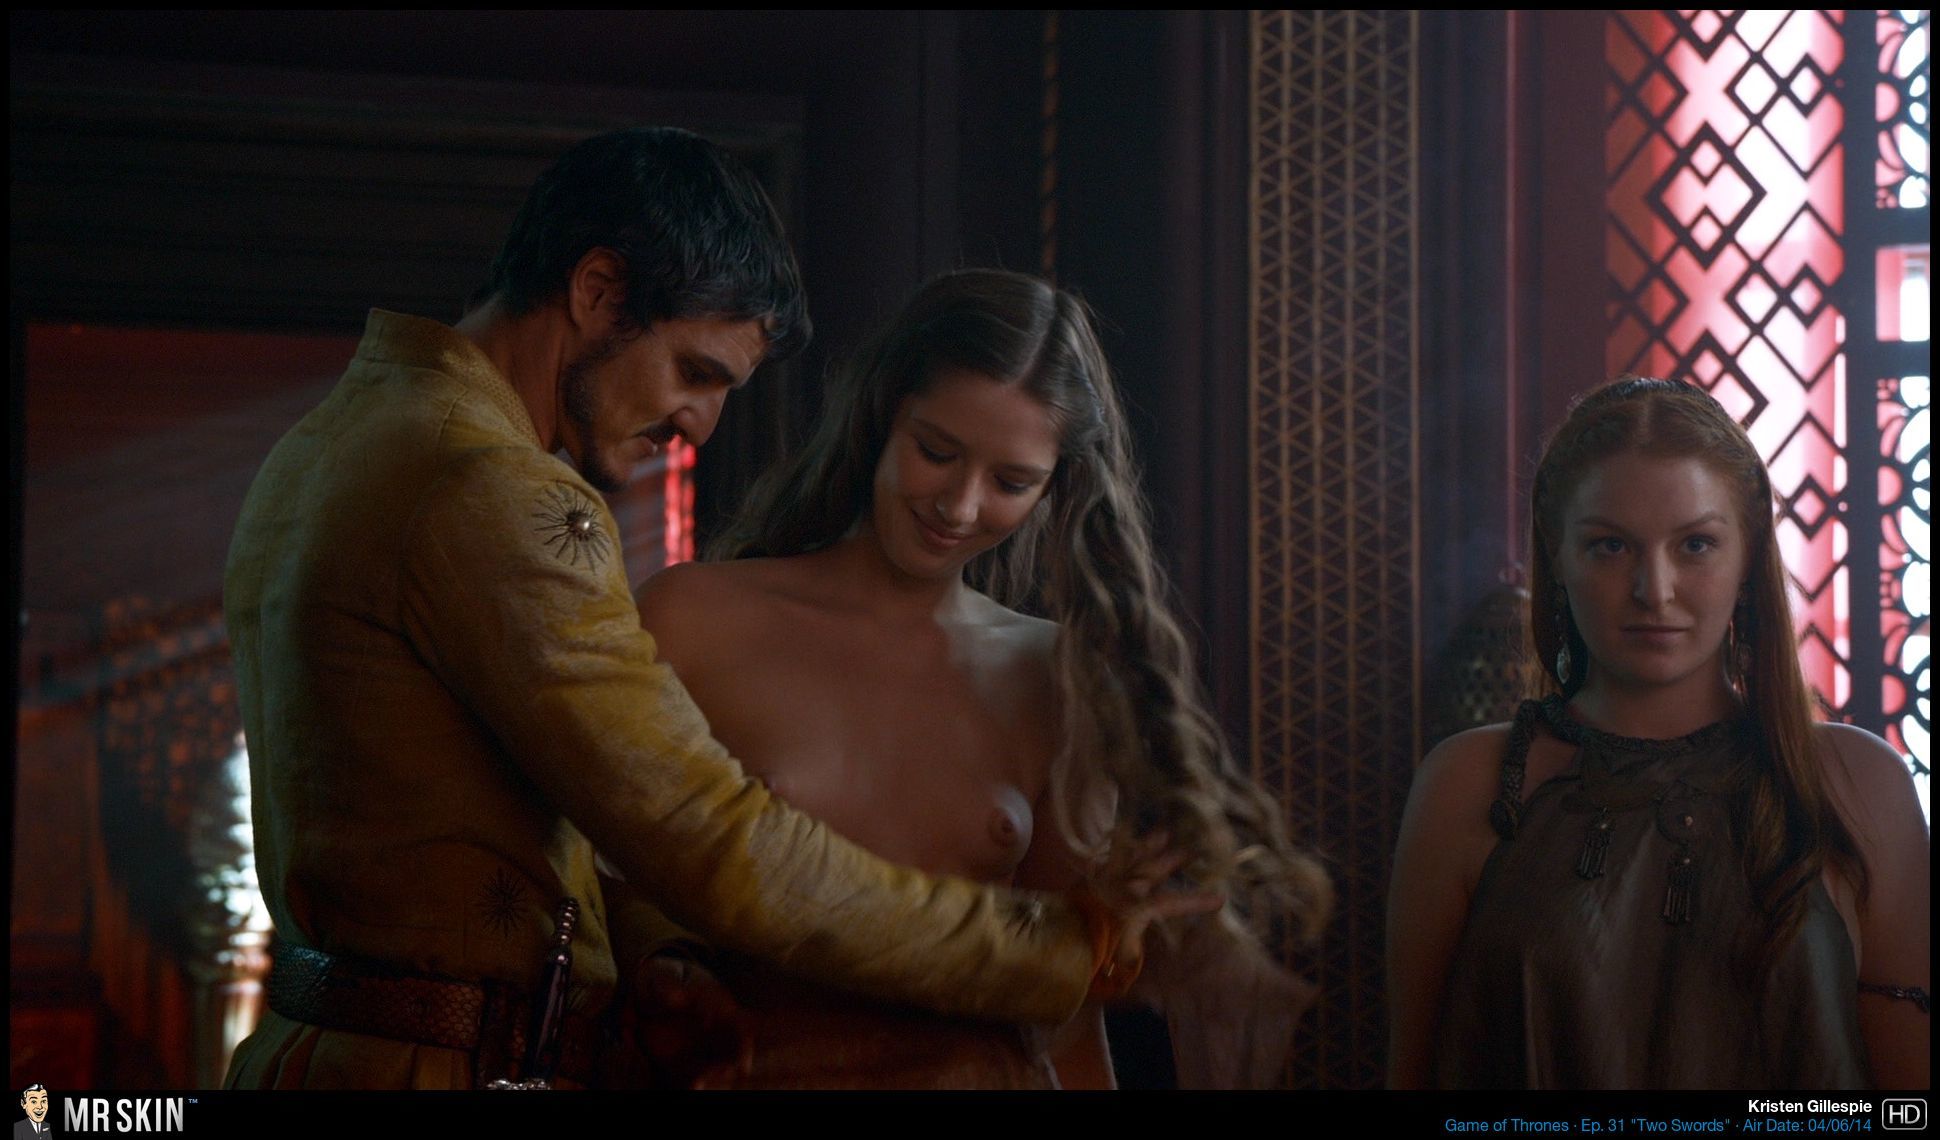 Naked Kristina Jillespie in Game of Thrones < ANCENSORED